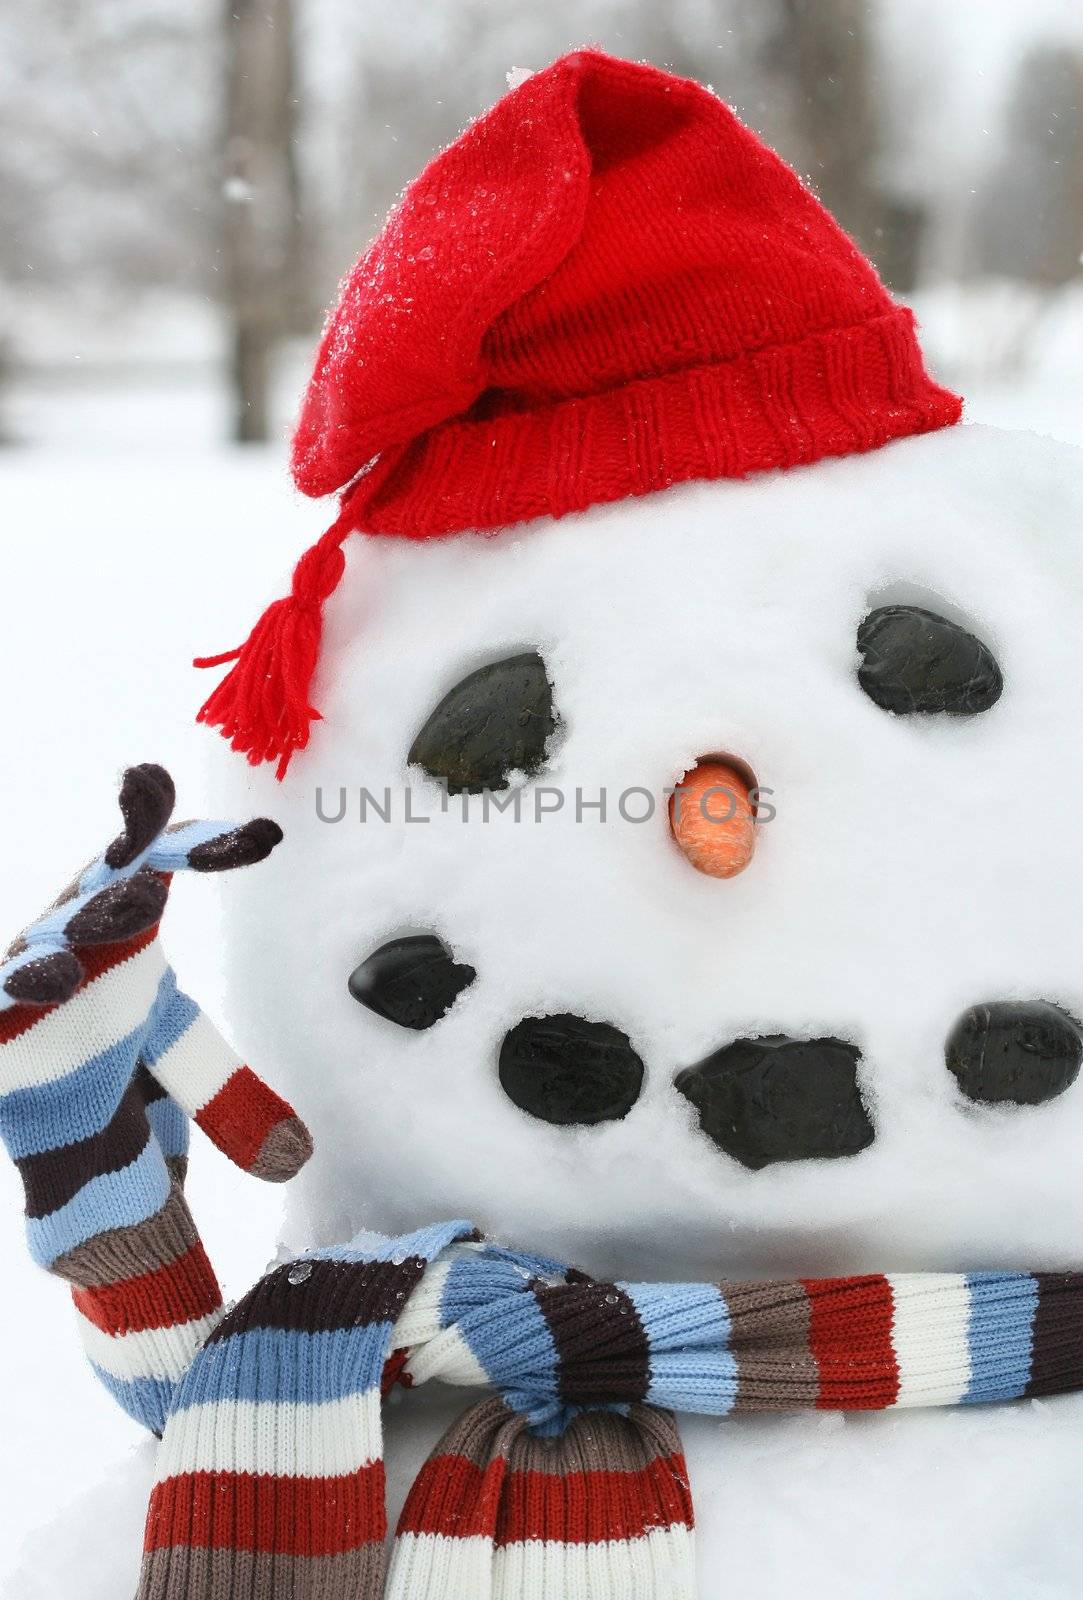 Smiley face snowman by Sandralise